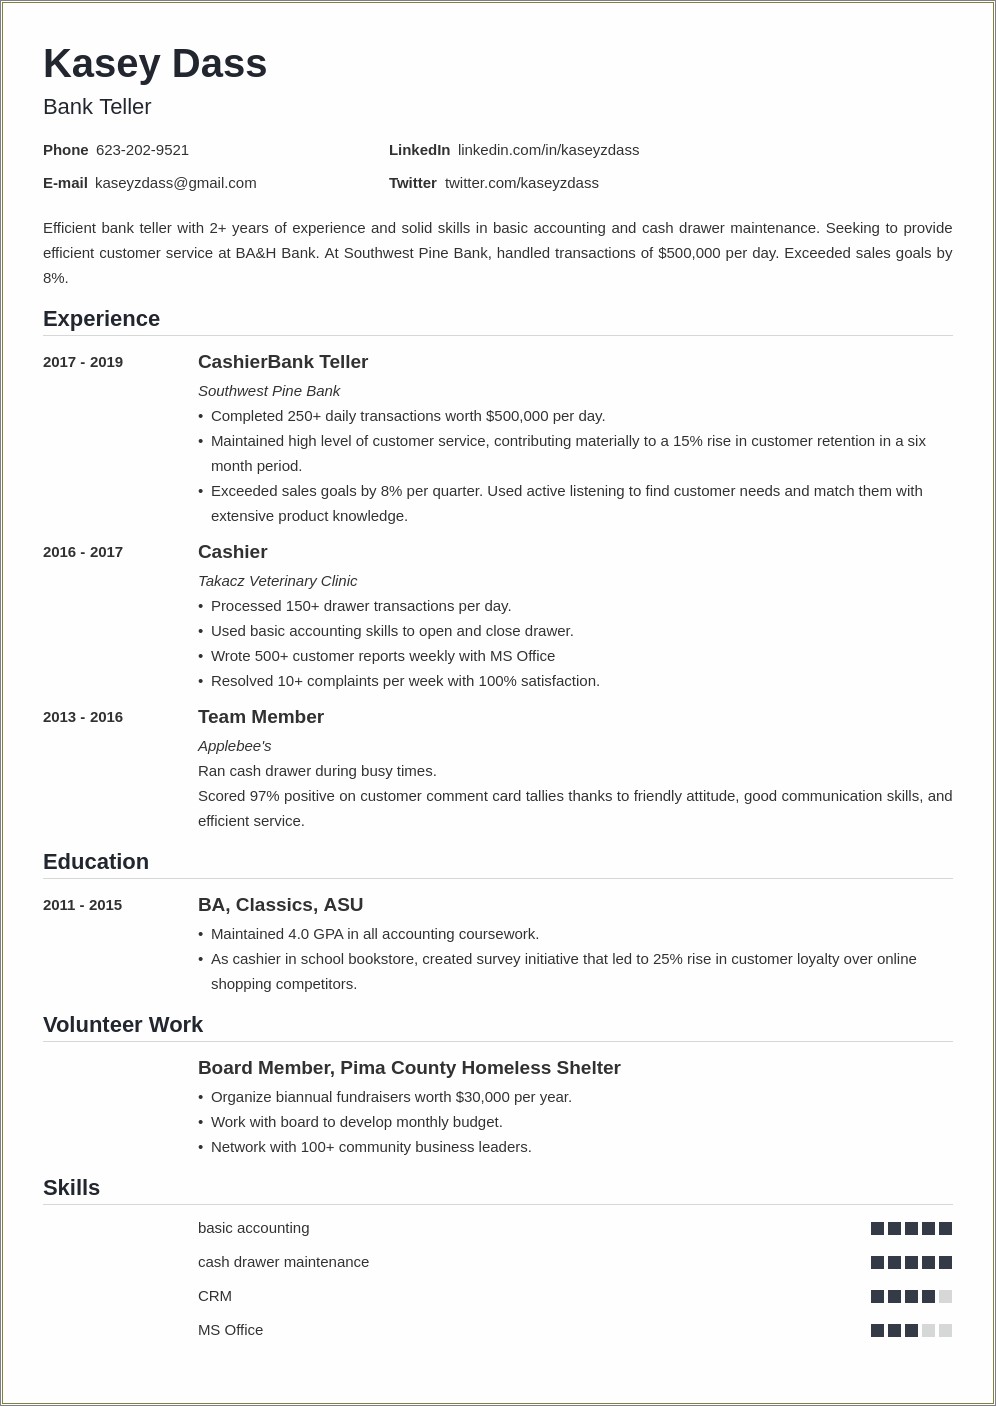 Resume For A Bank Teller Position Objective